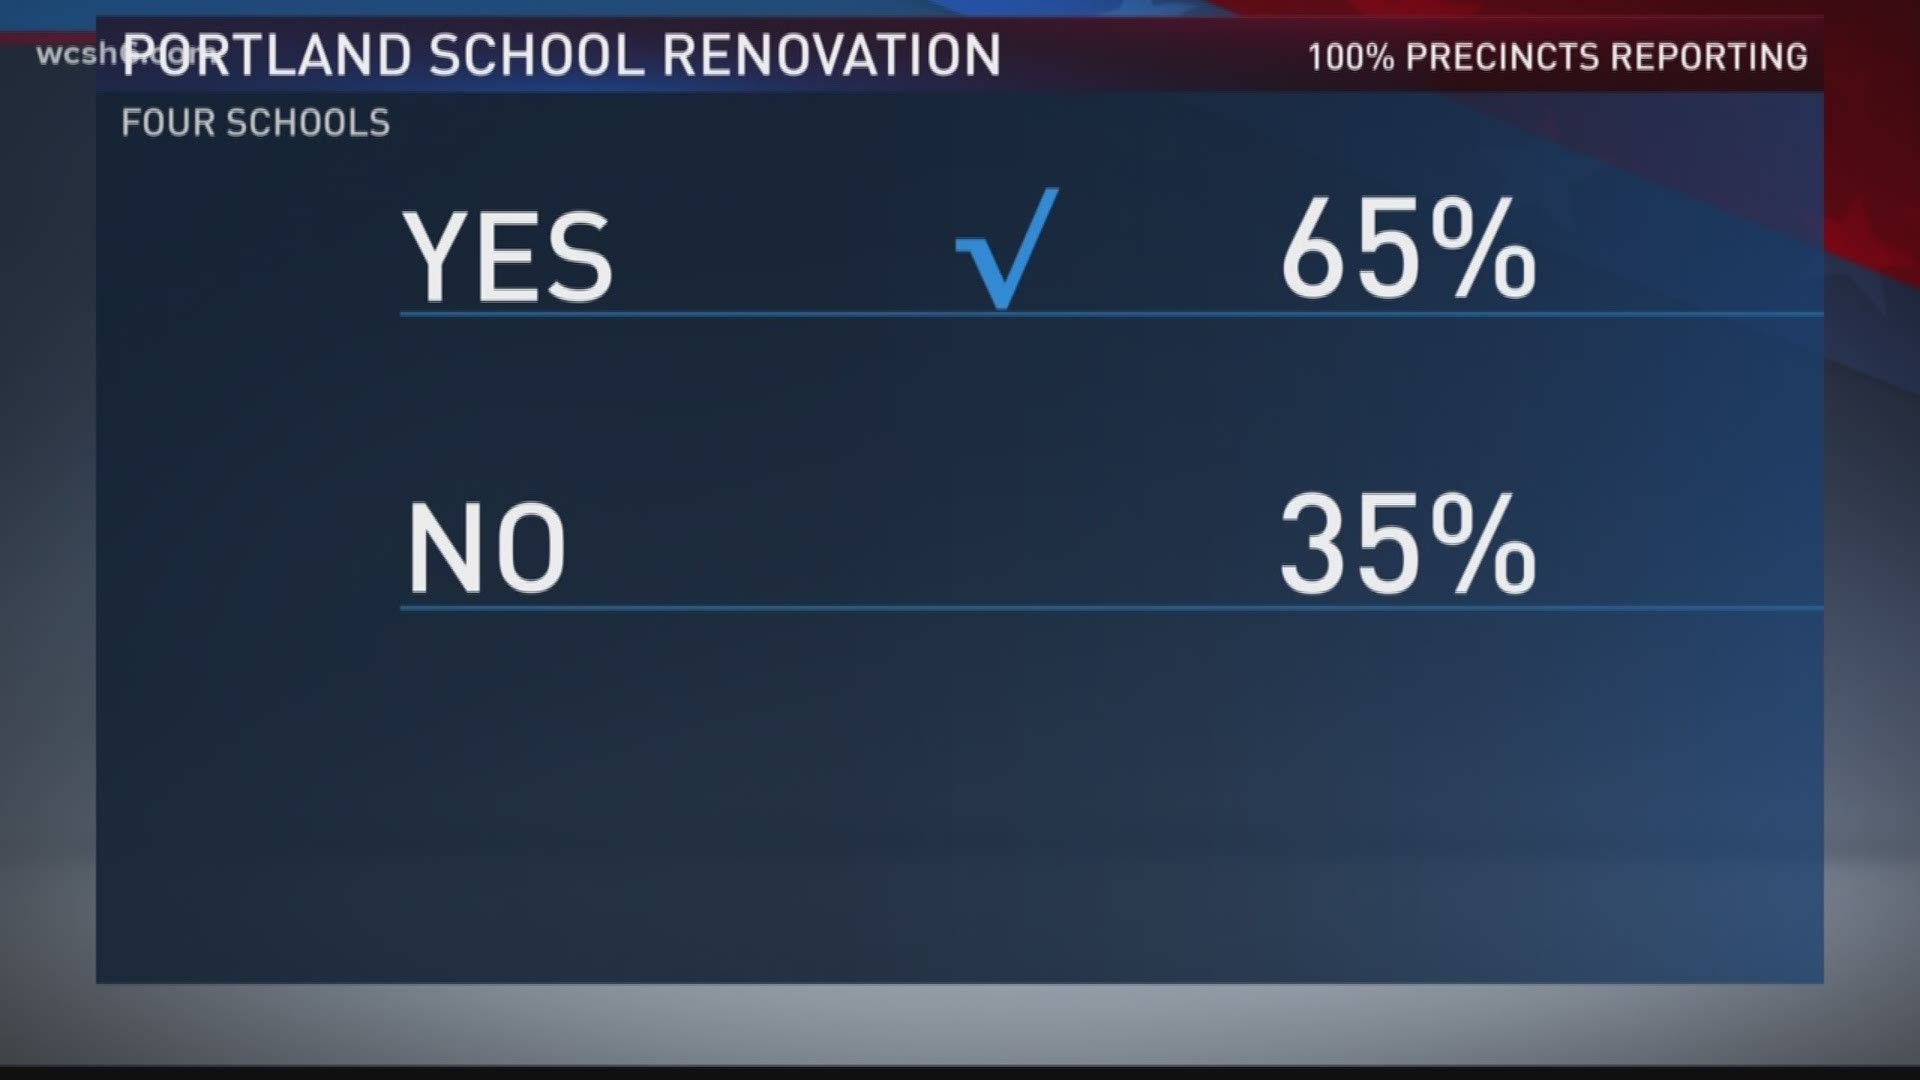 Voice of the Voter on the Portland school renovation.